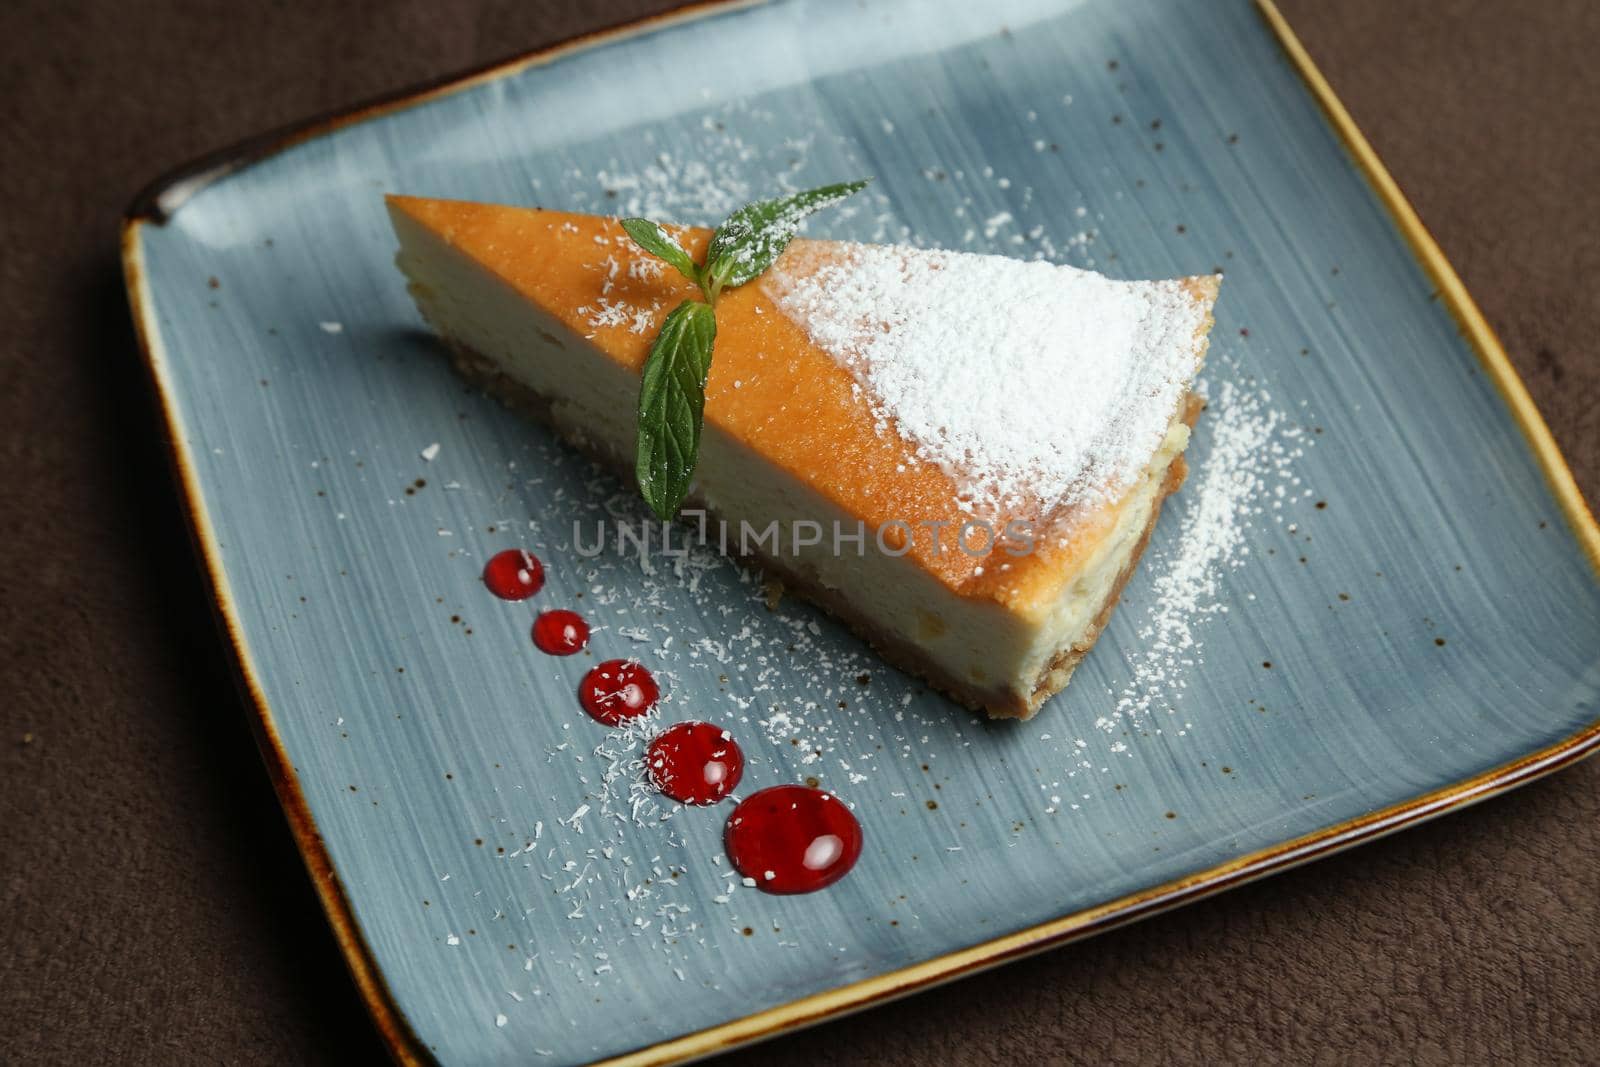 Delicious cheesecake with mint on the table by Djafarov